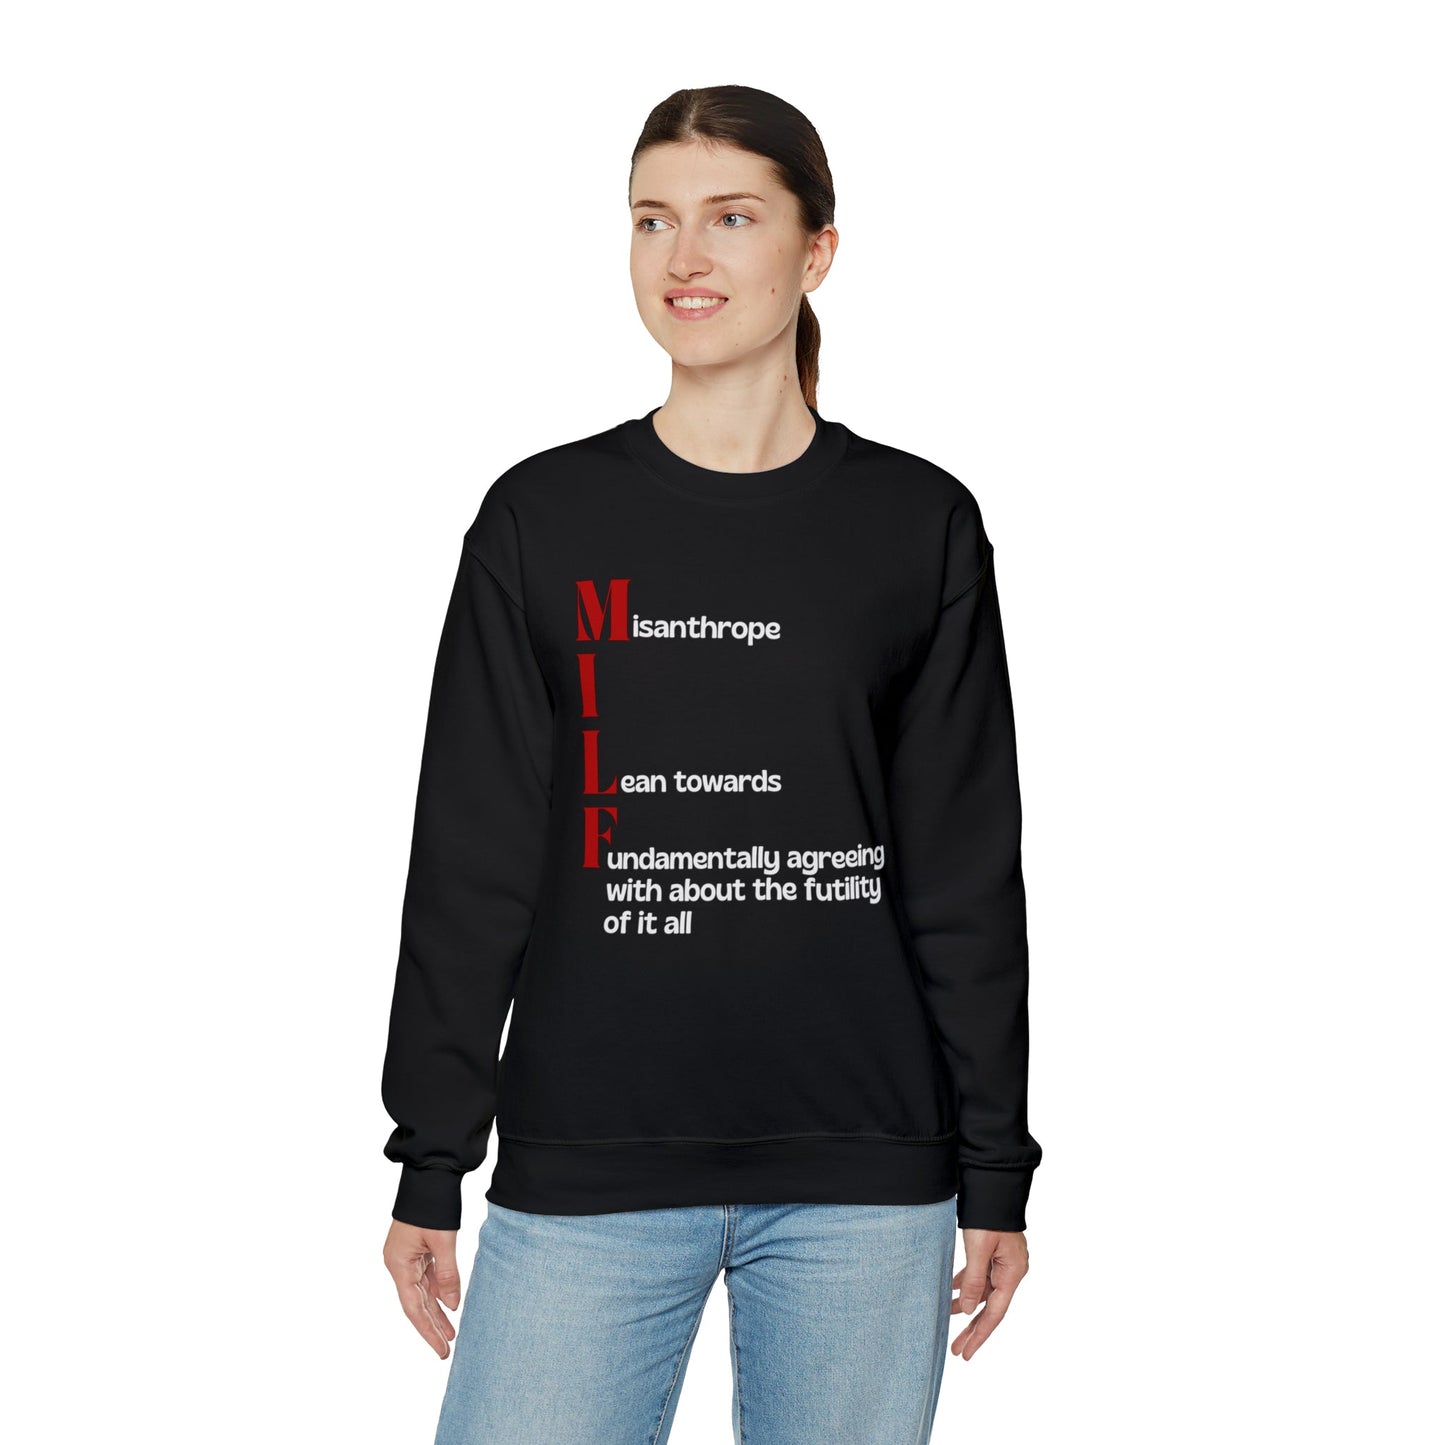 MILF Misanthrope I Lean Towards Fundamentally Agreeing With About the Futility of It All Unisex Heavy Blend™ Crewneck Sweatshirt